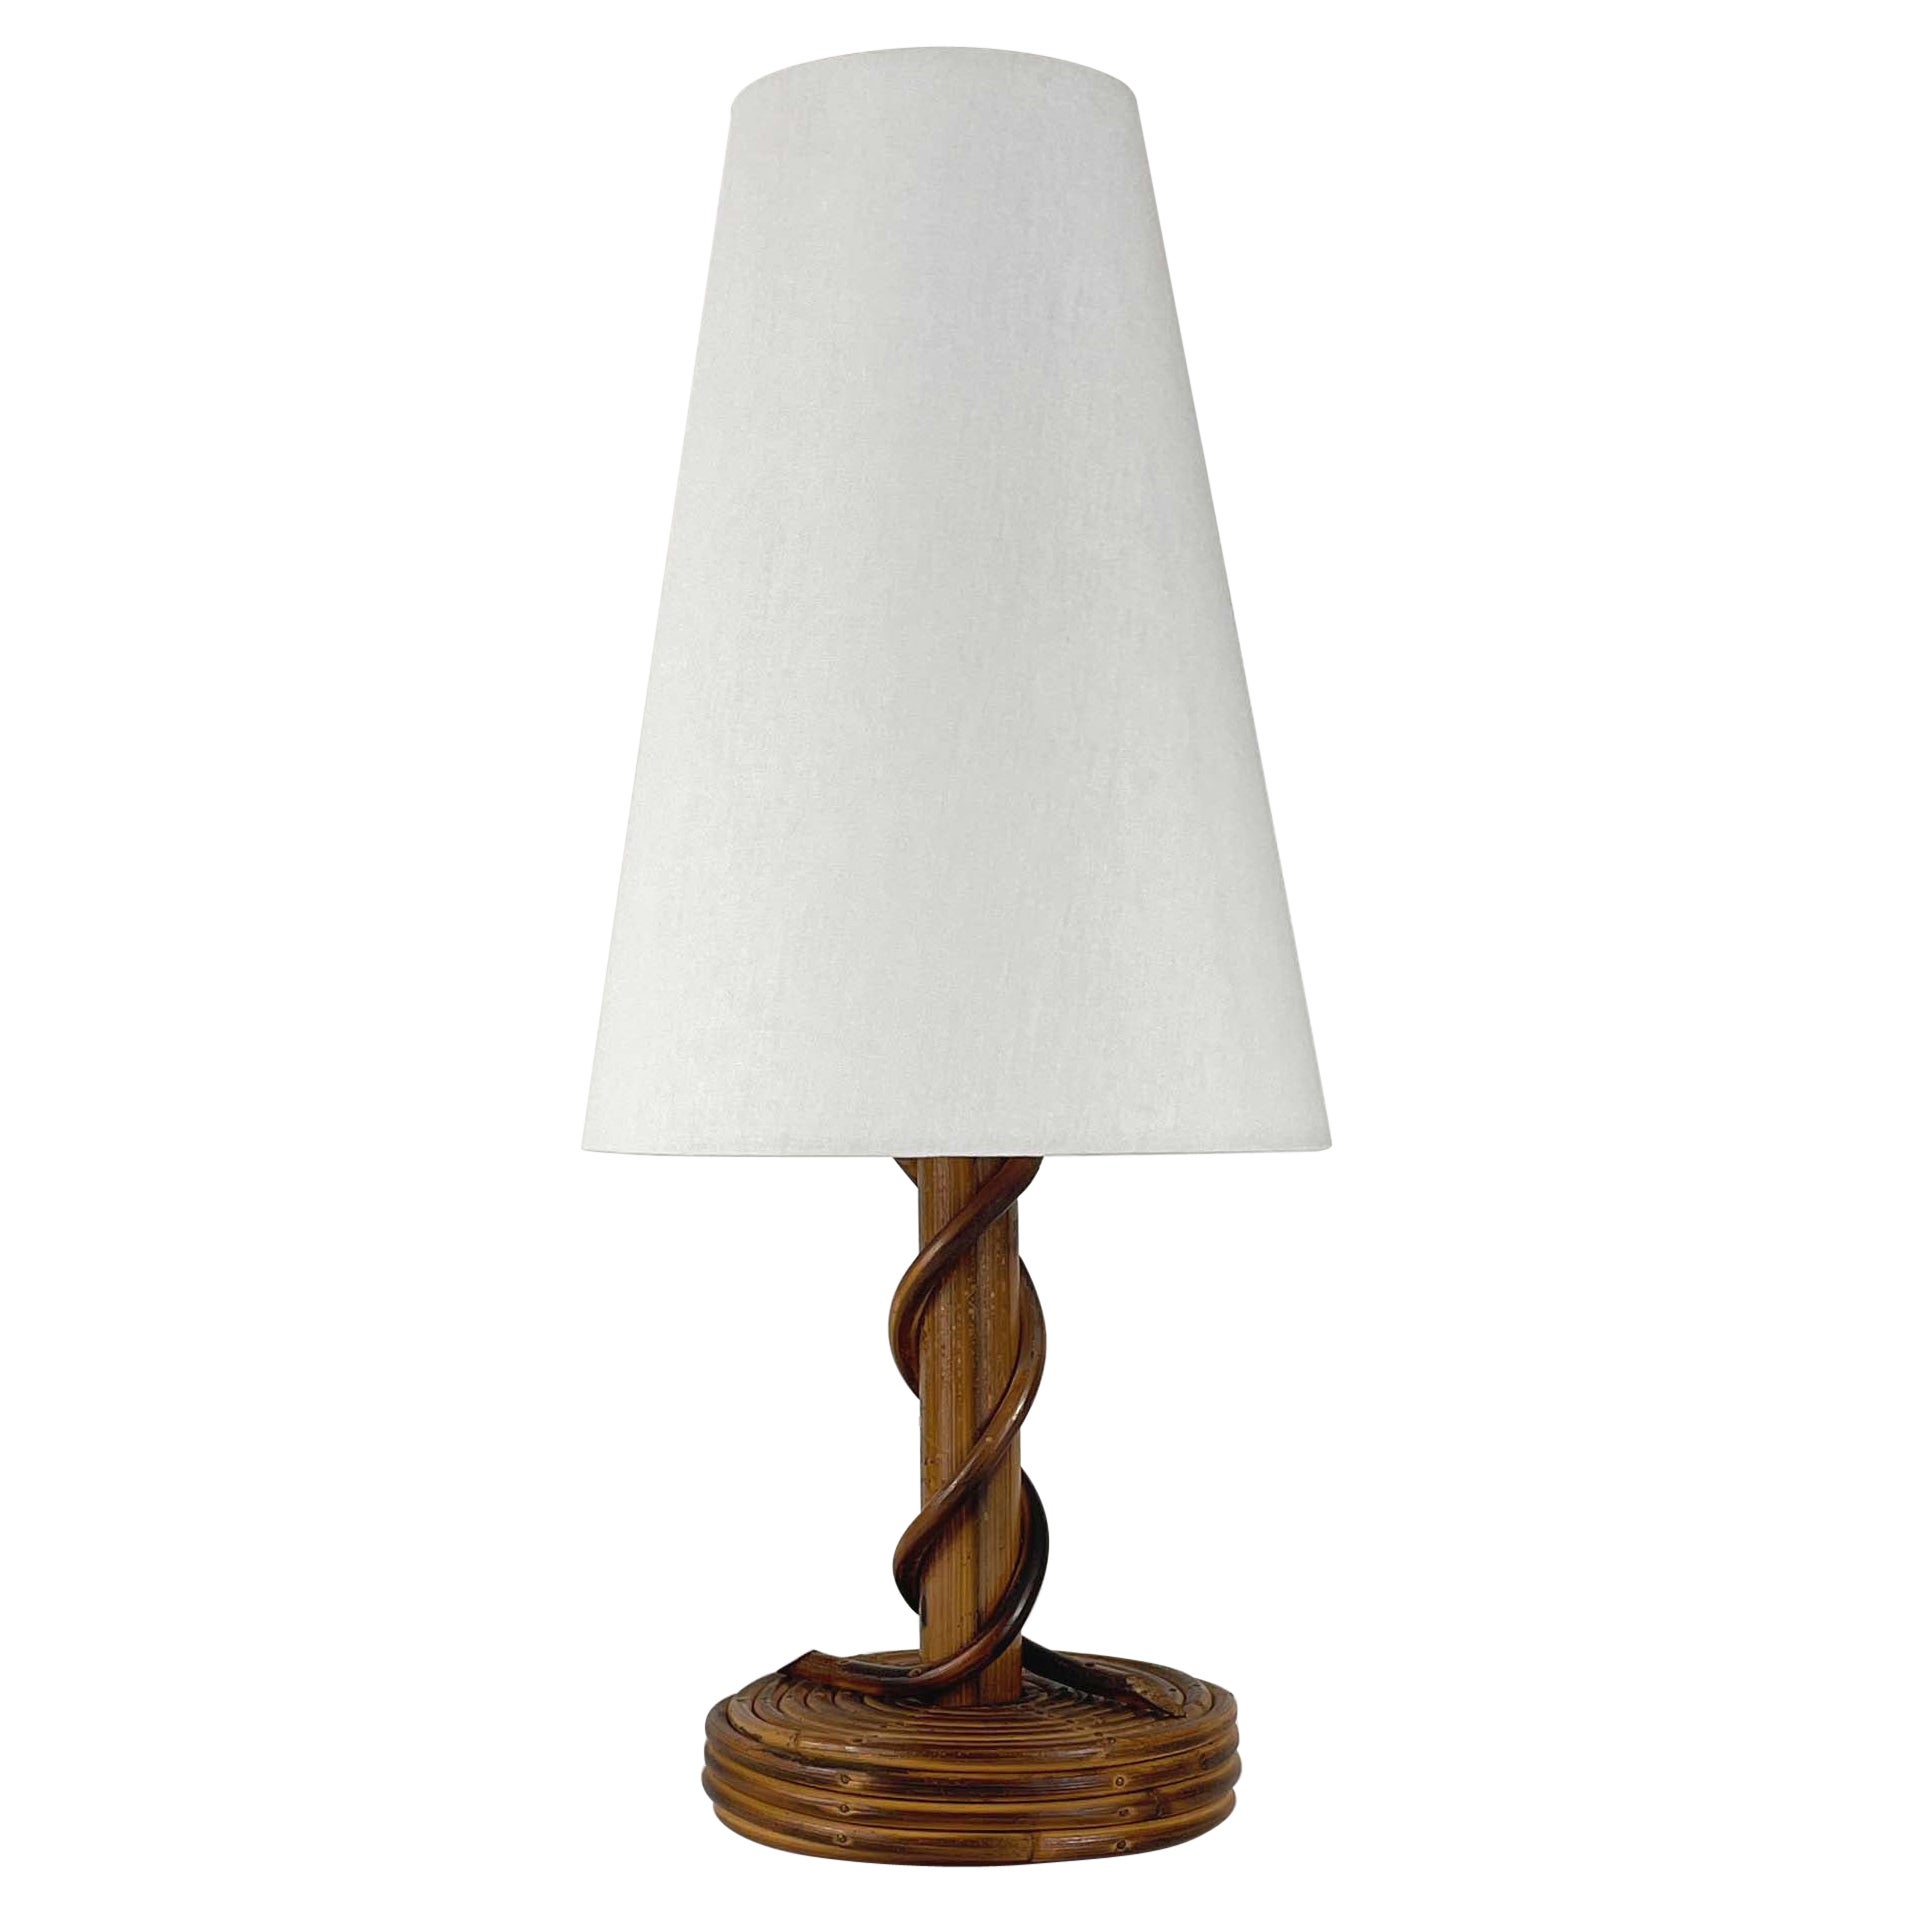 Louis SOGNOT Rattan Bamboo Fabric Table Lamp, France 1950s For Sale